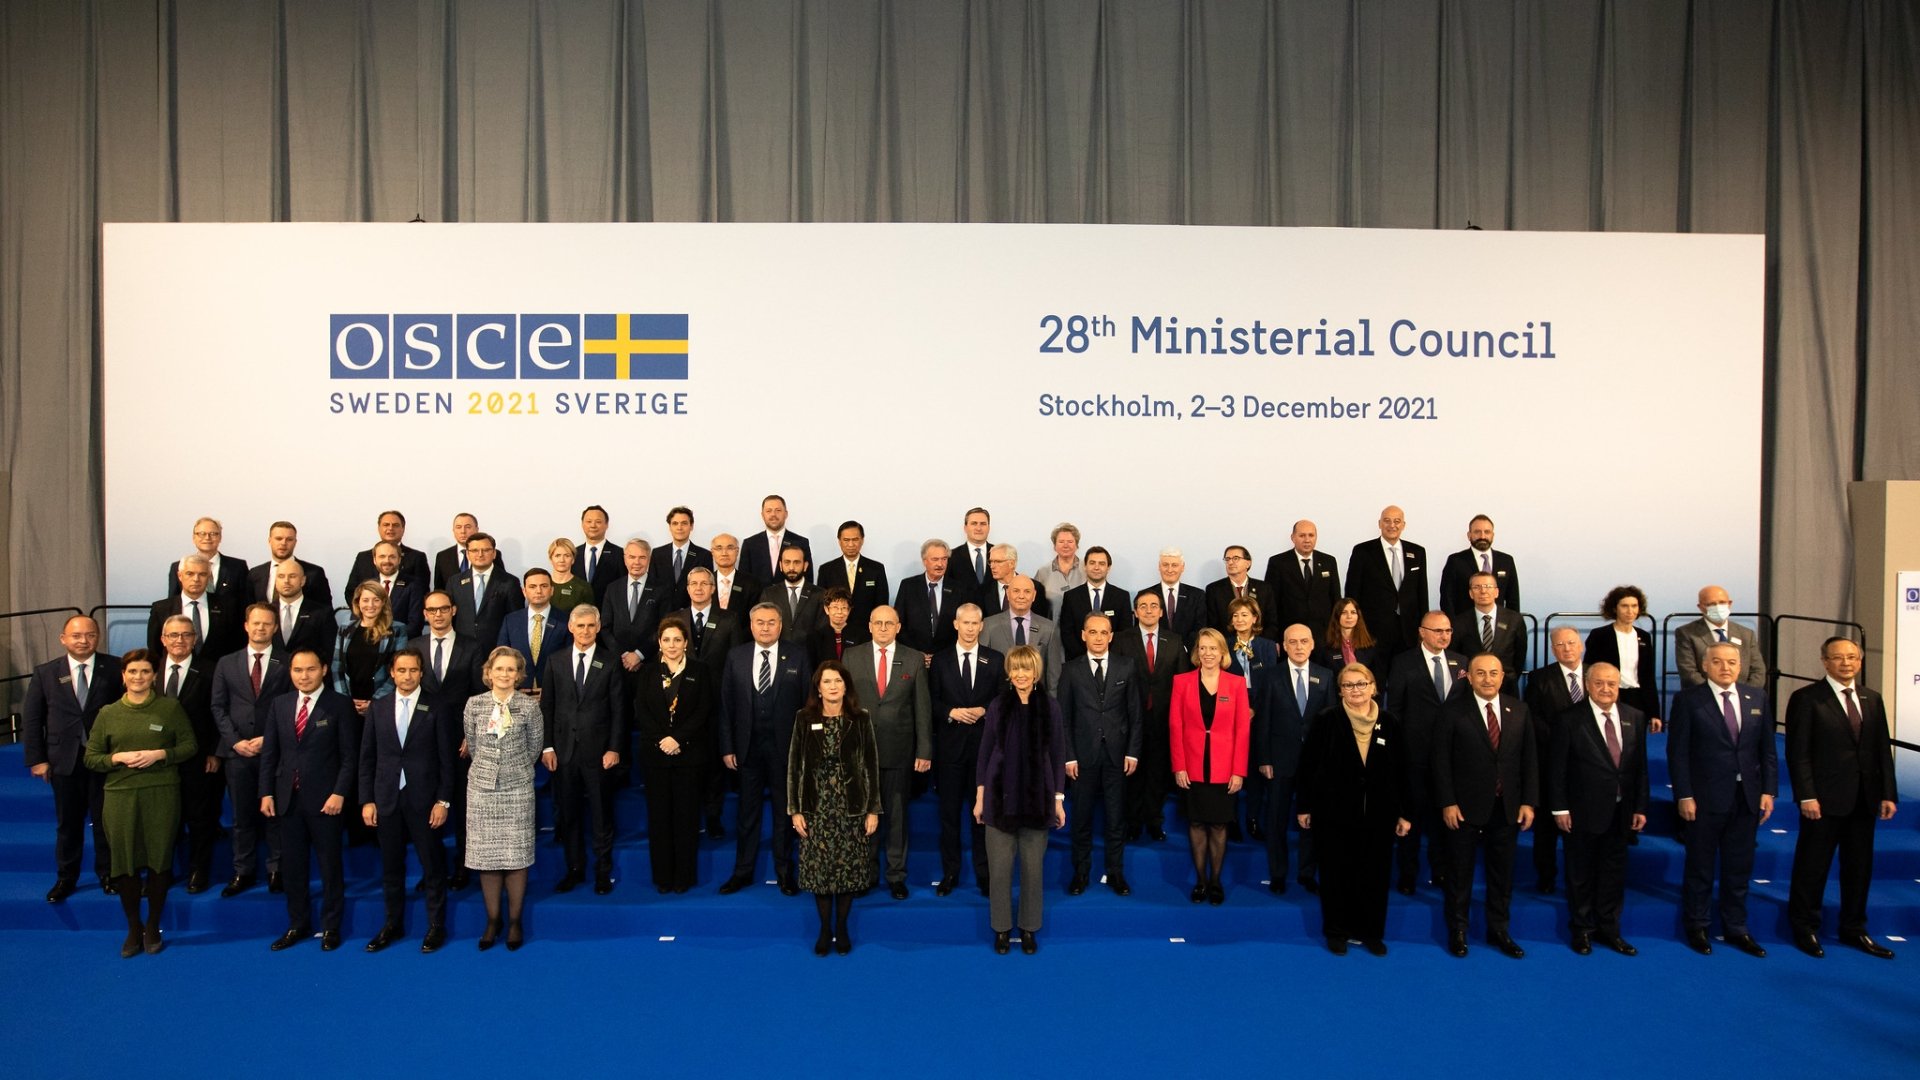 28th OSCE Ministerial Council, Family Photo 